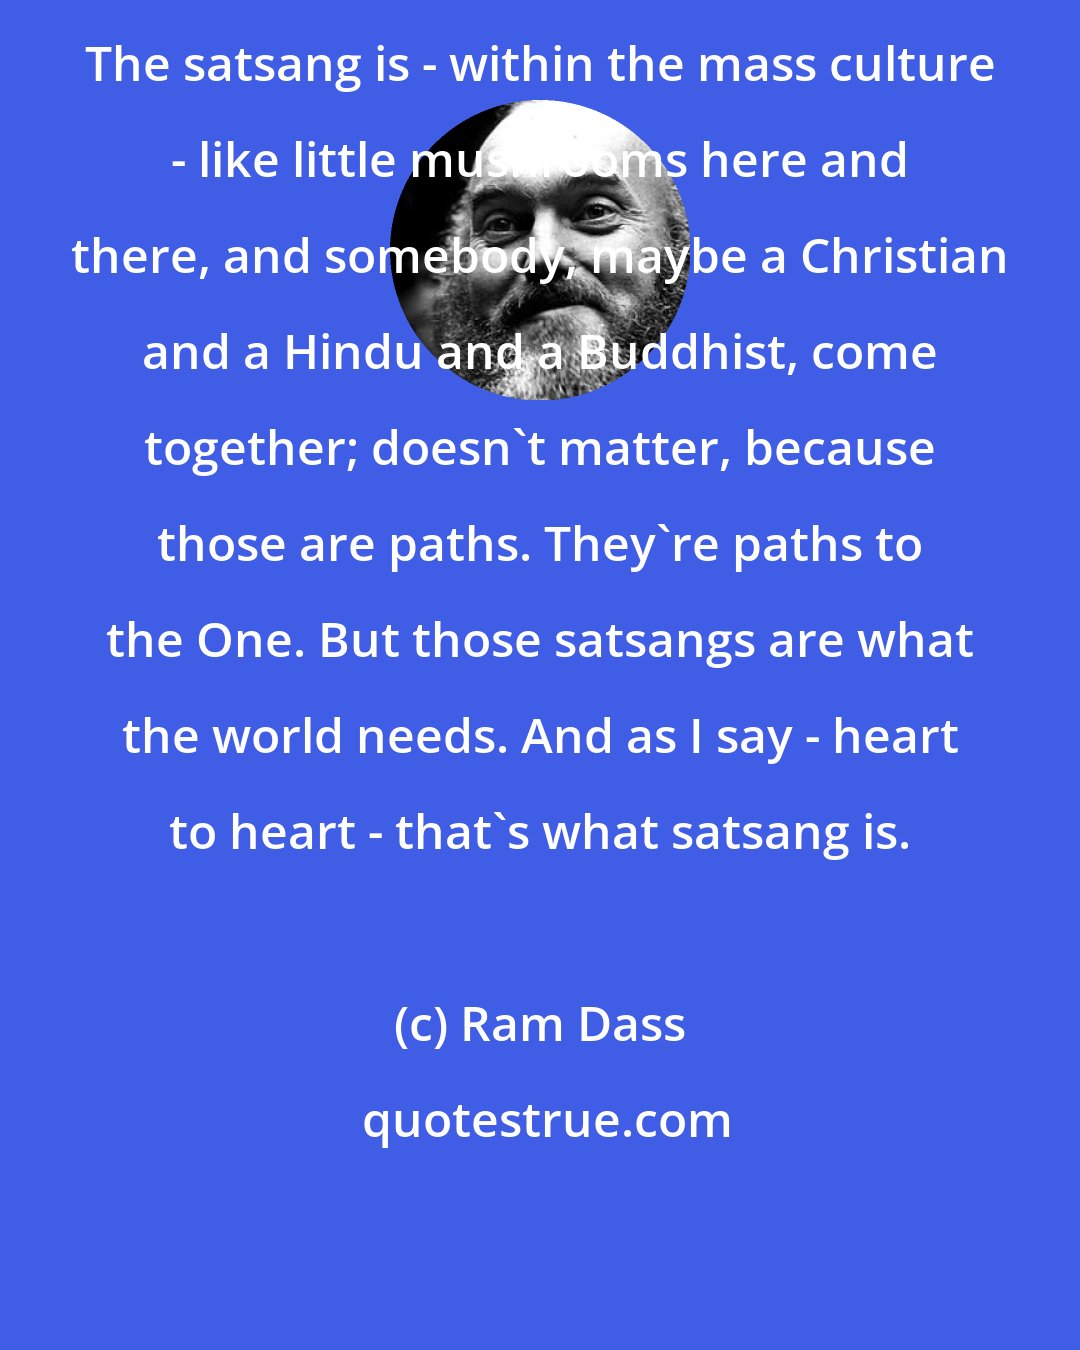 Ram Dass: The satsang is - within the mass culture - like little mushrooms here and there, and somebody, maybe a Christian and a Hindu and a Buddhist, come together; doesn't matter, because those are paths. They're paths to the One. But those satsangs are what the world needs. And as I say - heart to heart - that's what satsang is.